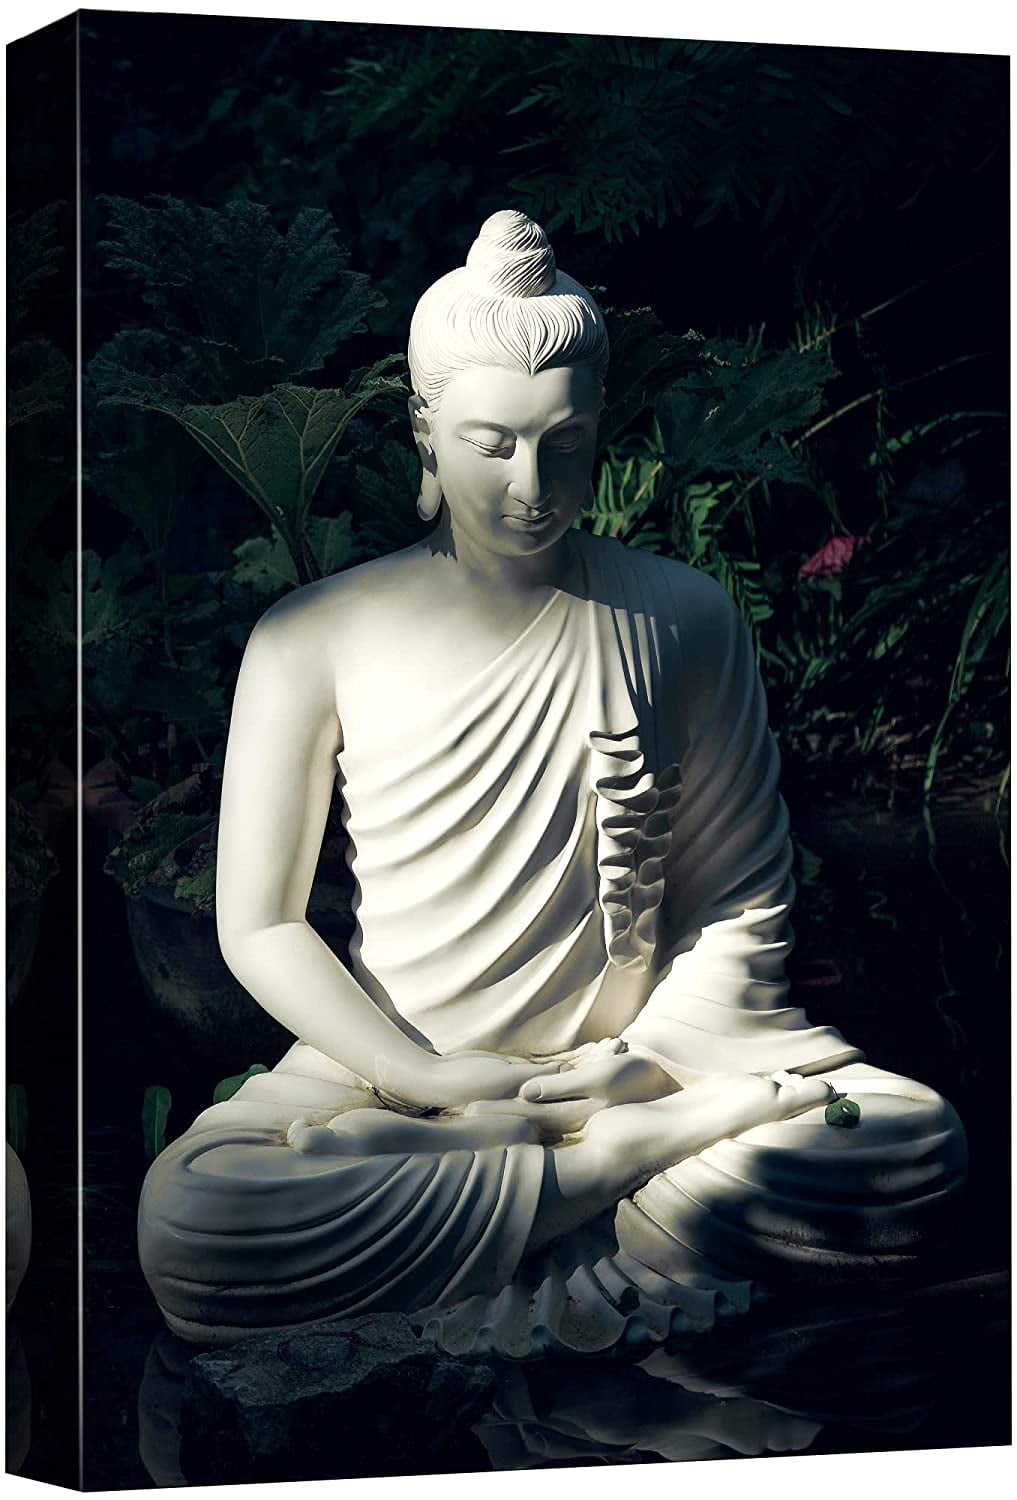 wall26 Canvas Print Wall Art Meditating Buddhism Buddha Statue Jungle  Shadows Cultural Religious Photography Realism Decorative Yoga Relax/Calm  for